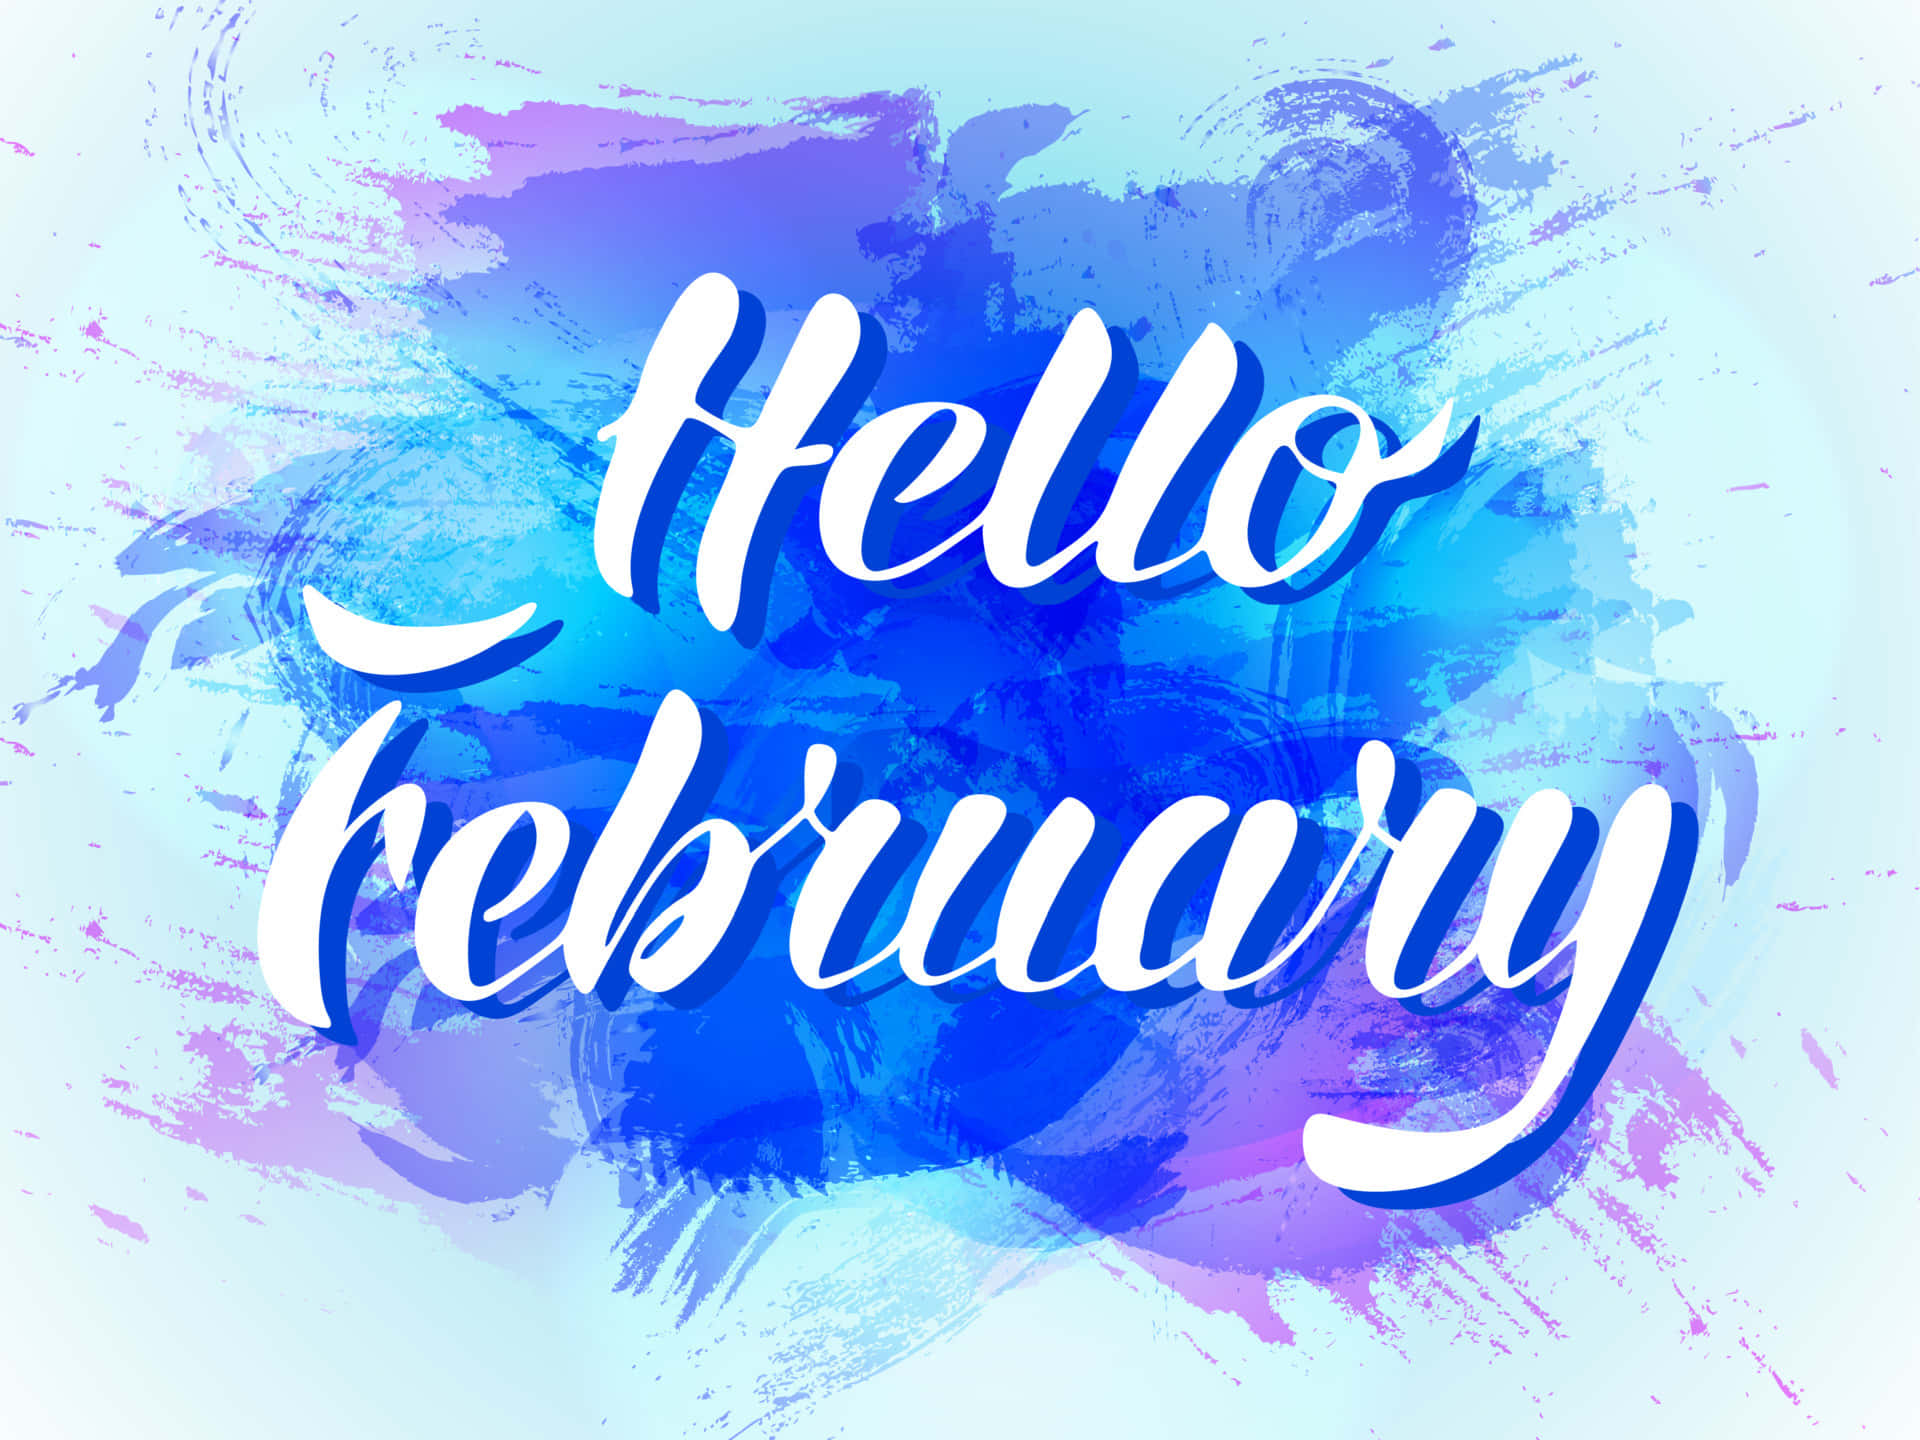 Welcome the month of February with a celebration 🥳 Wallpaper